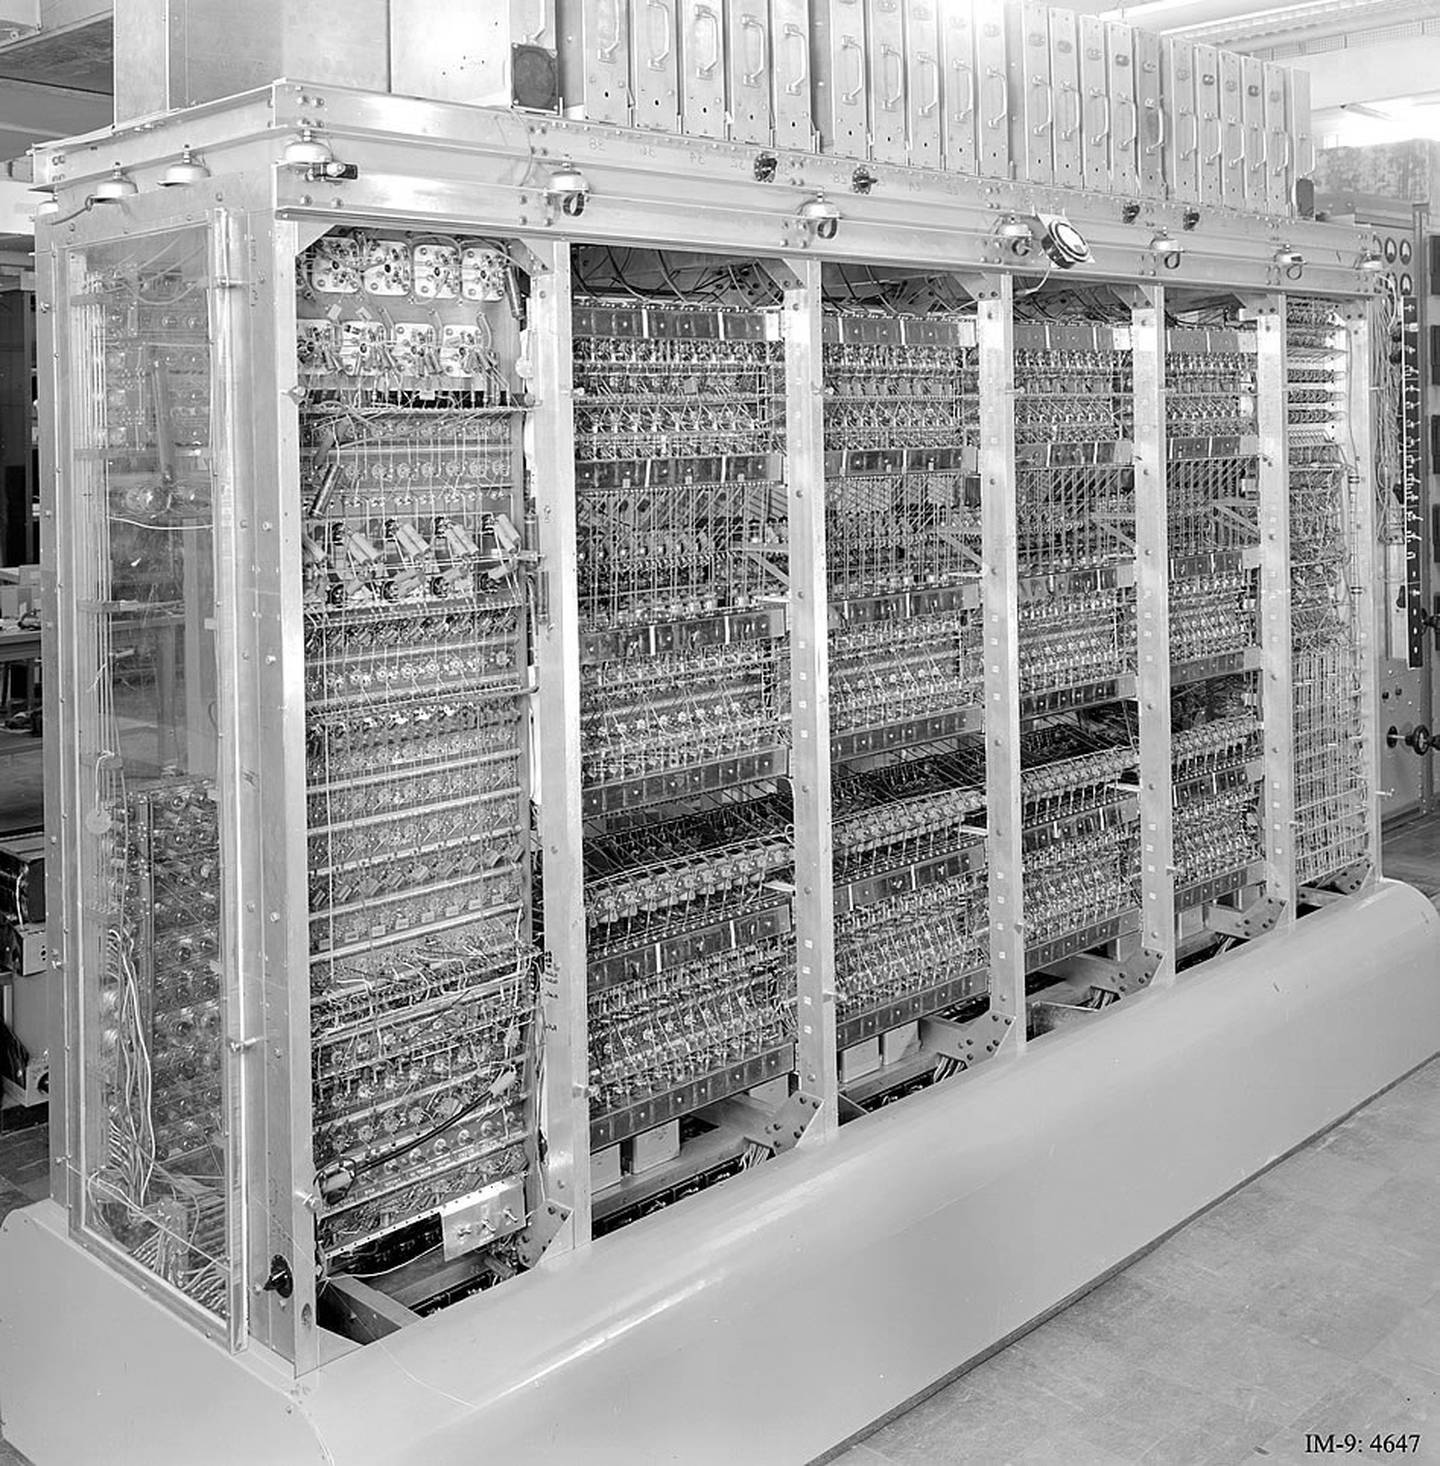 Everyone fears the atomic bomb but the H bomb was more lethal and needed a supercomputer to achieve its calculations.  This is the story of MANIAC.